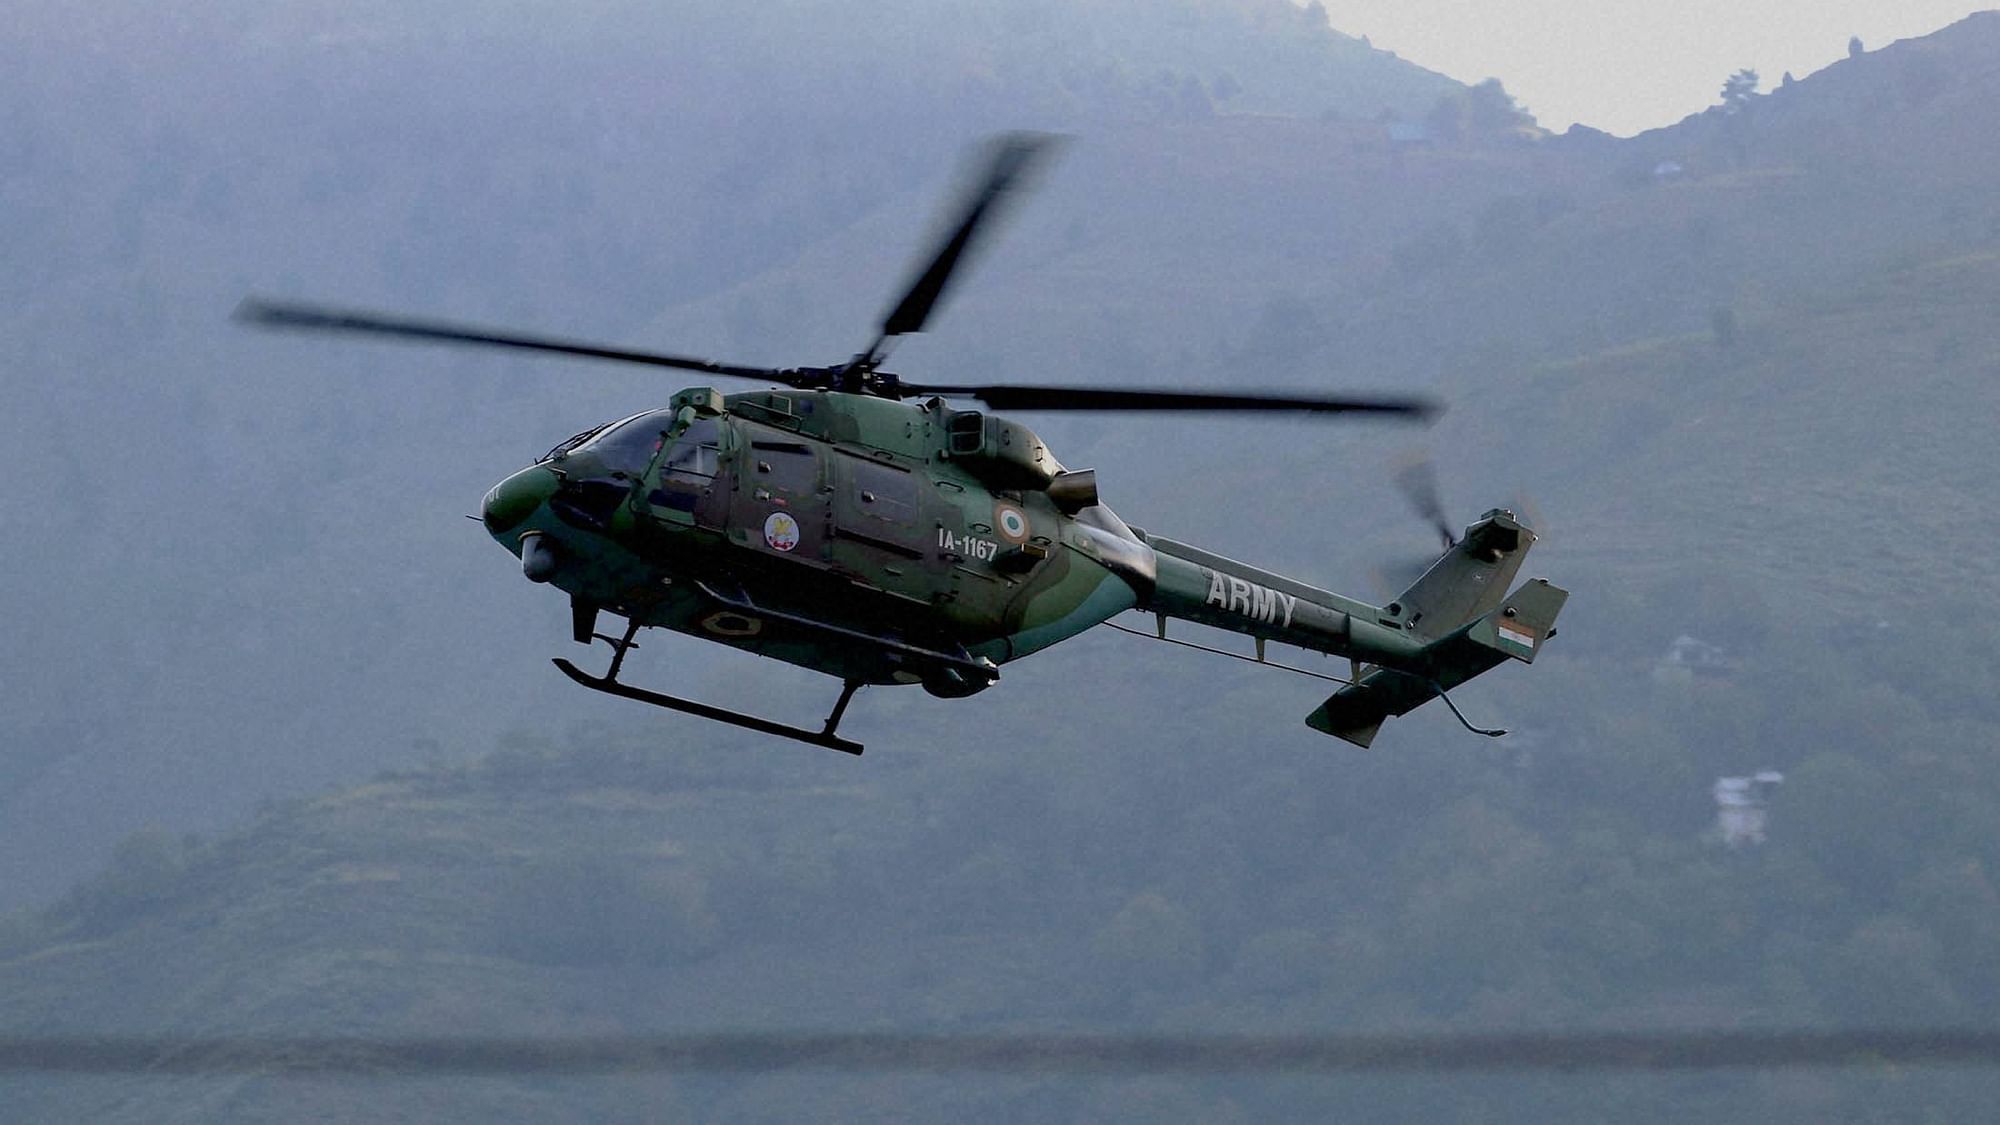 An Indian Army helicopter flies above the Army base which was attacked by suspected militants in the town of Uri, west of Srinagar. (Photo: AP)